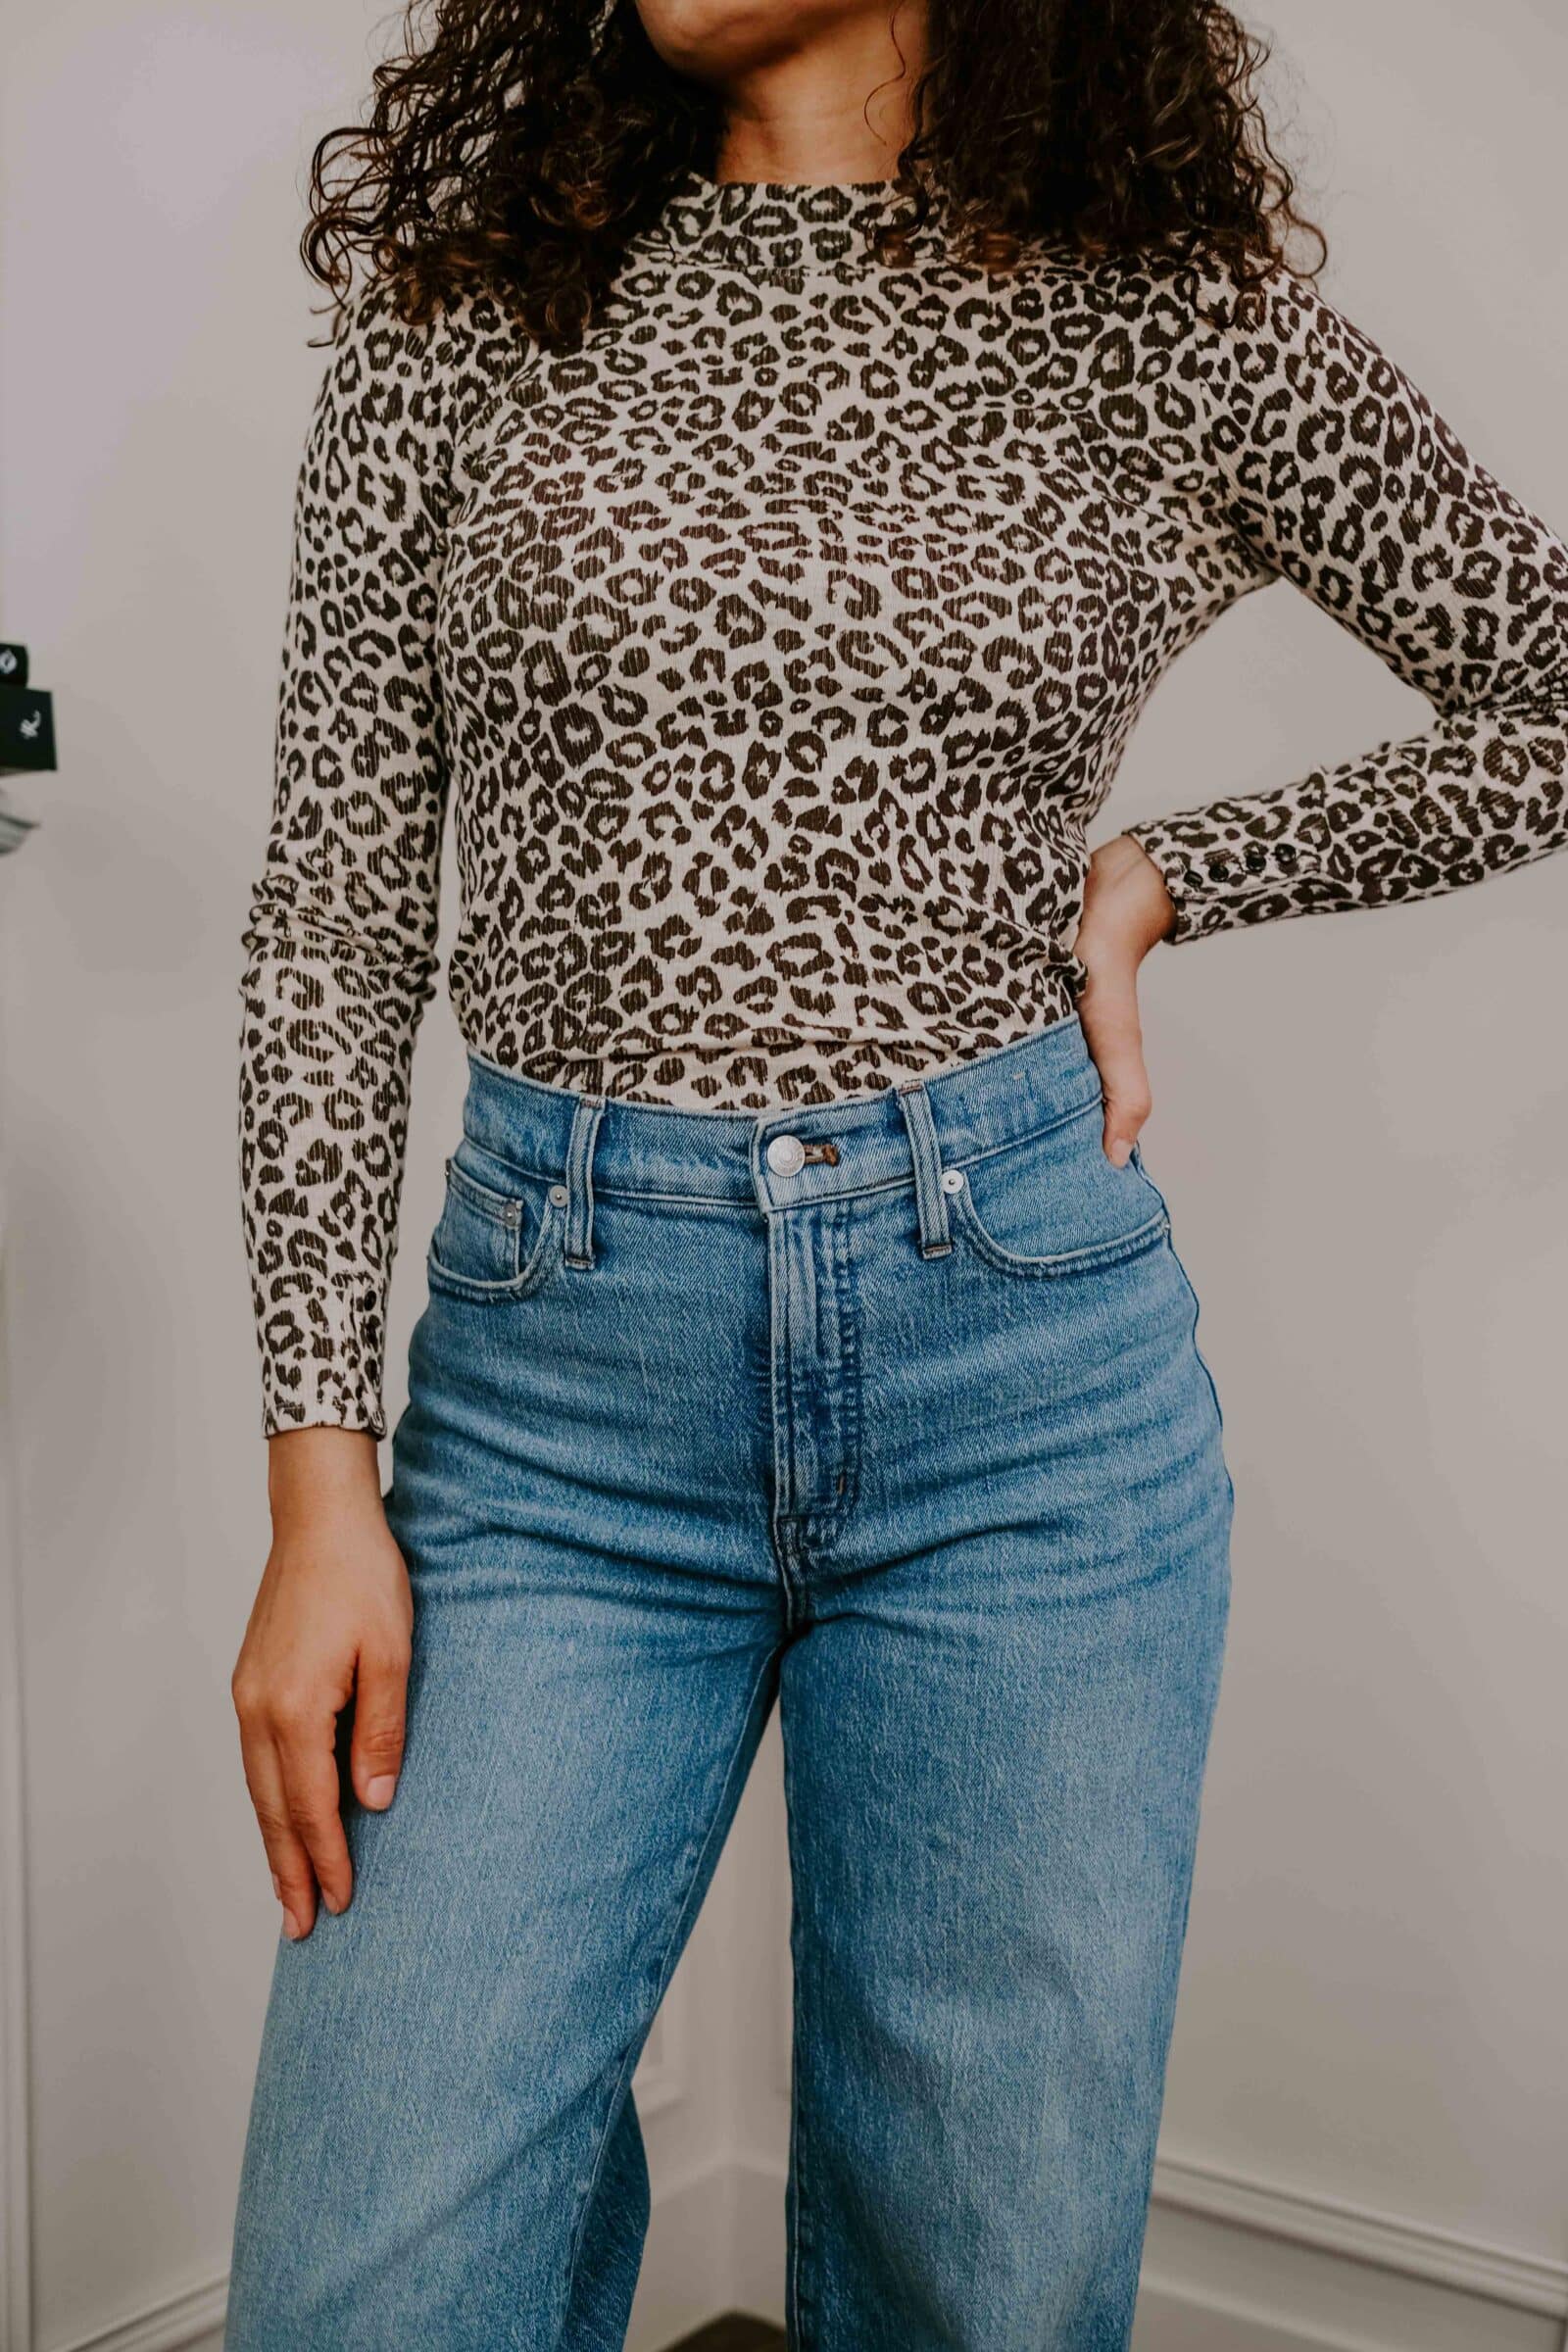 cute outfits with jeans: wide-leg jeans, ankle boots, leopard print shirt